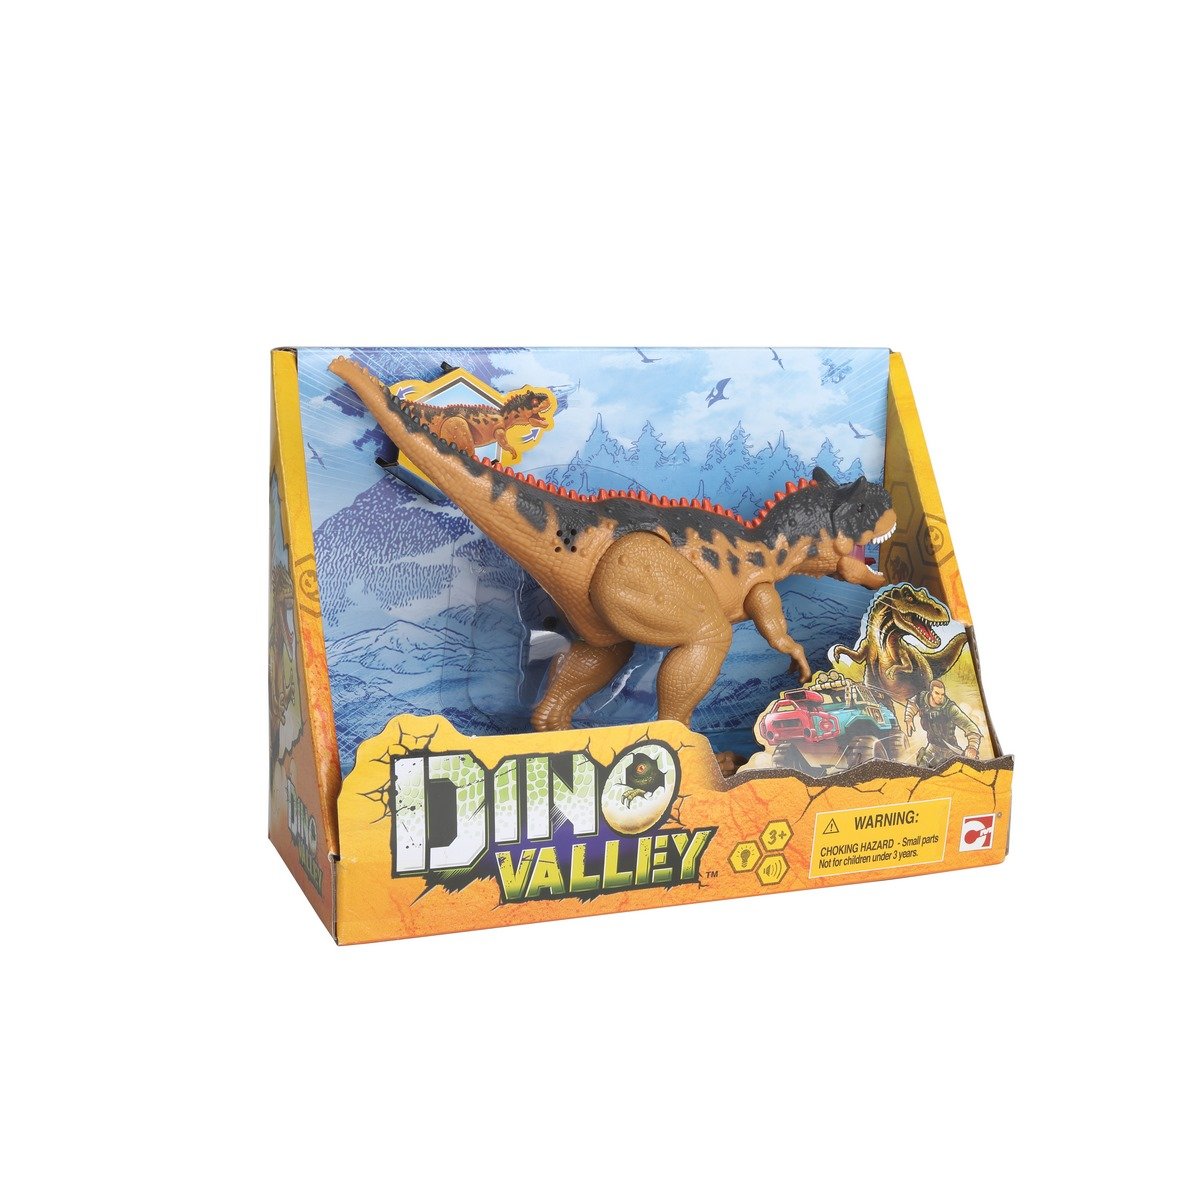 Dinosaure interactif sonore lumineux neuf - Maxi Toys